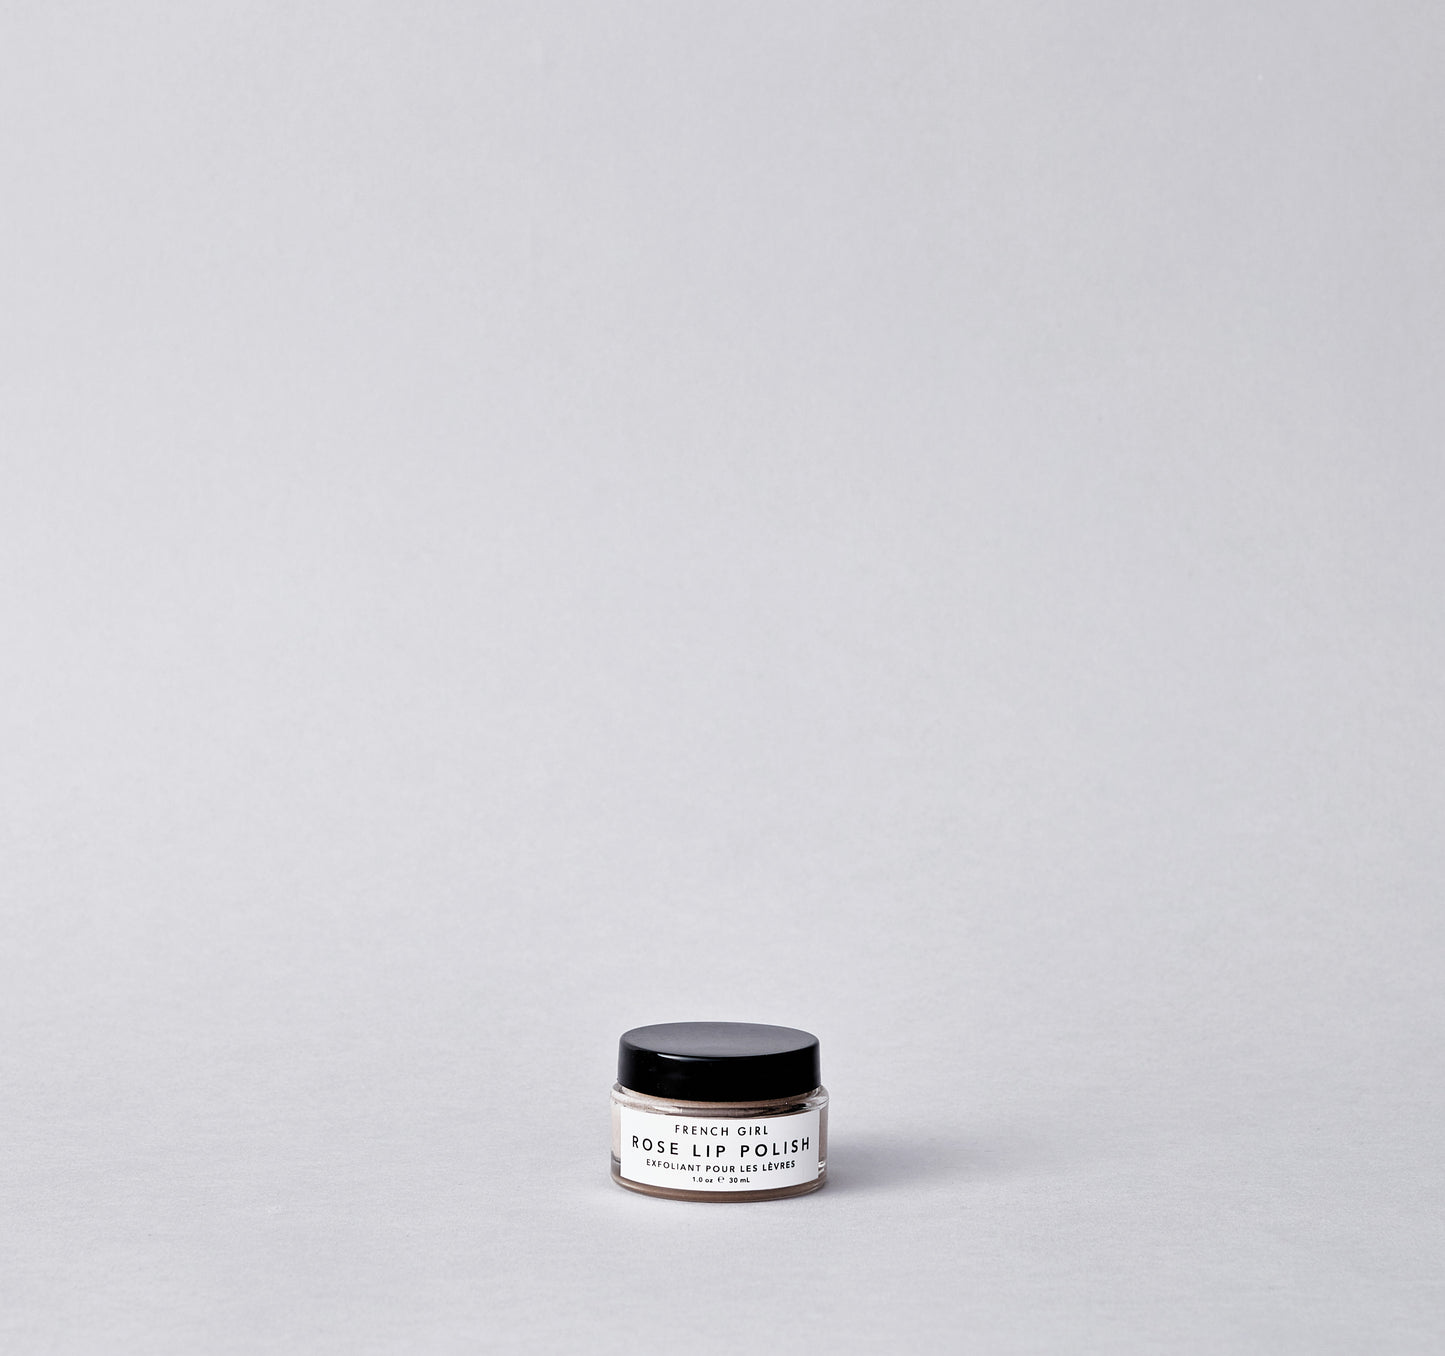 An invigorating rose and mint-infused sugar scrub formulated with nourishing butters to gently remove dry skin and leave lips supple and hydrated.